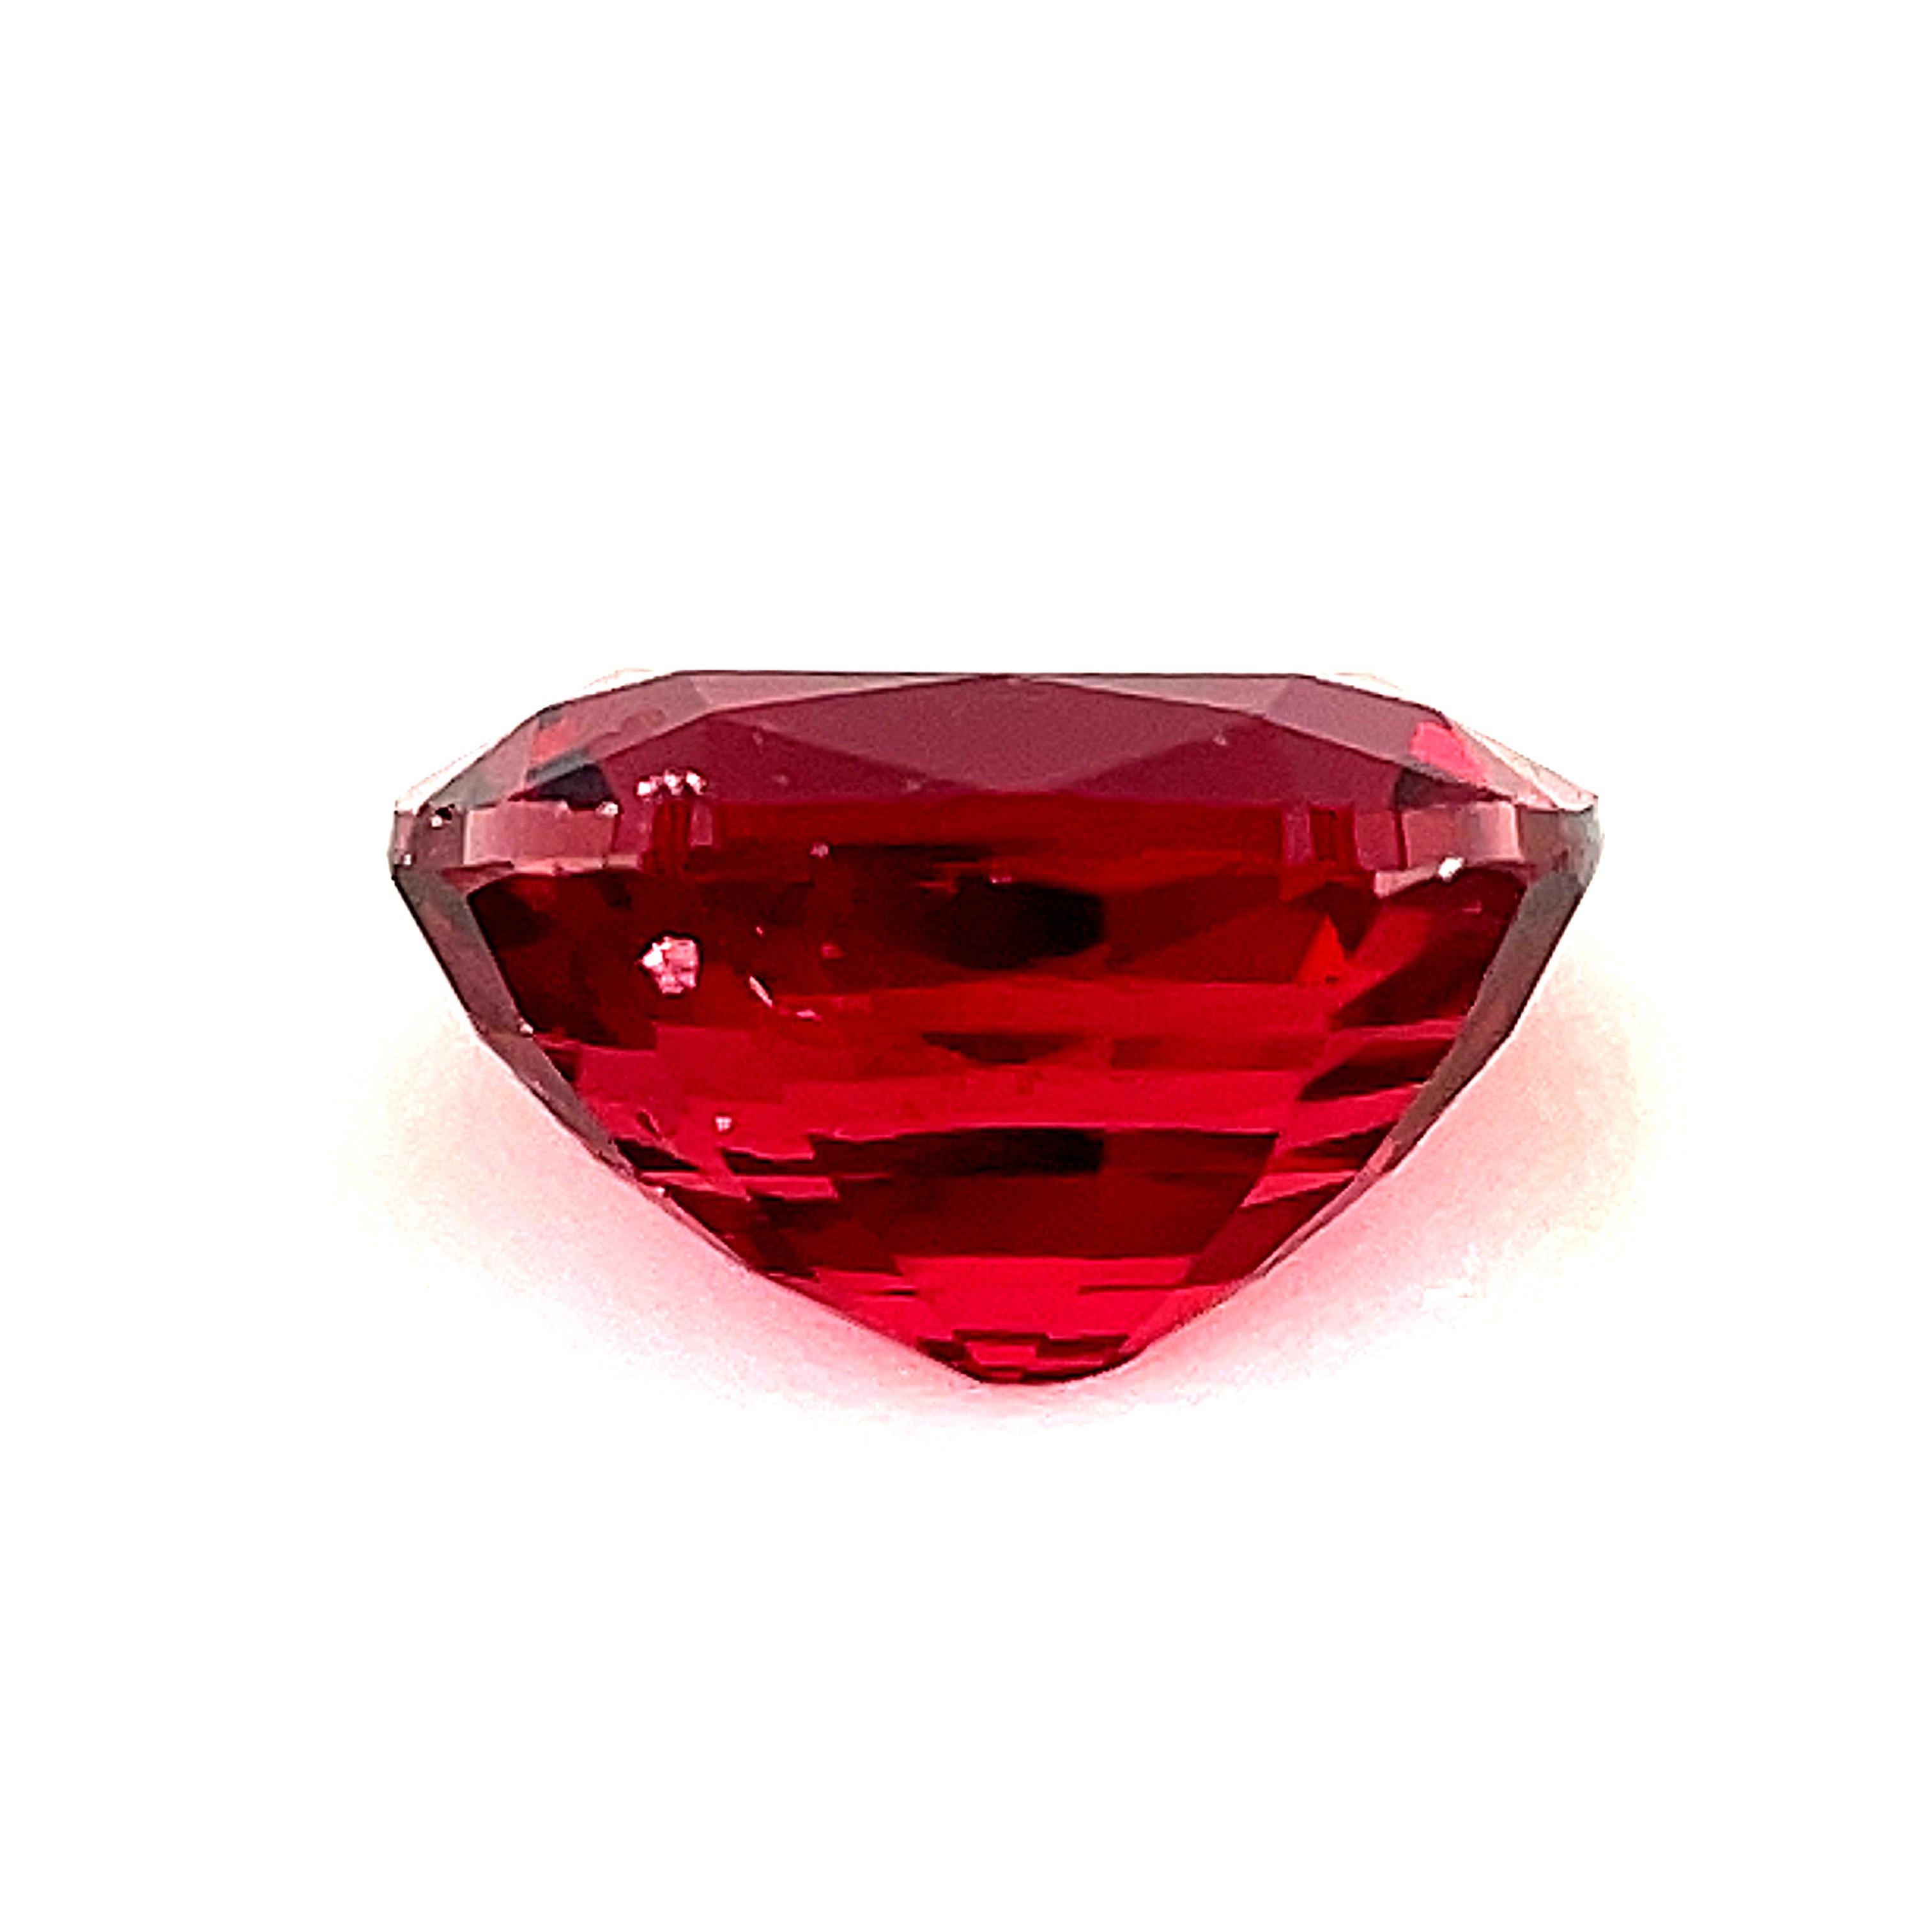 .85 Carat Cushion Cut Unset Loose Unmounted Red Spinel Gemstone For Sale 1